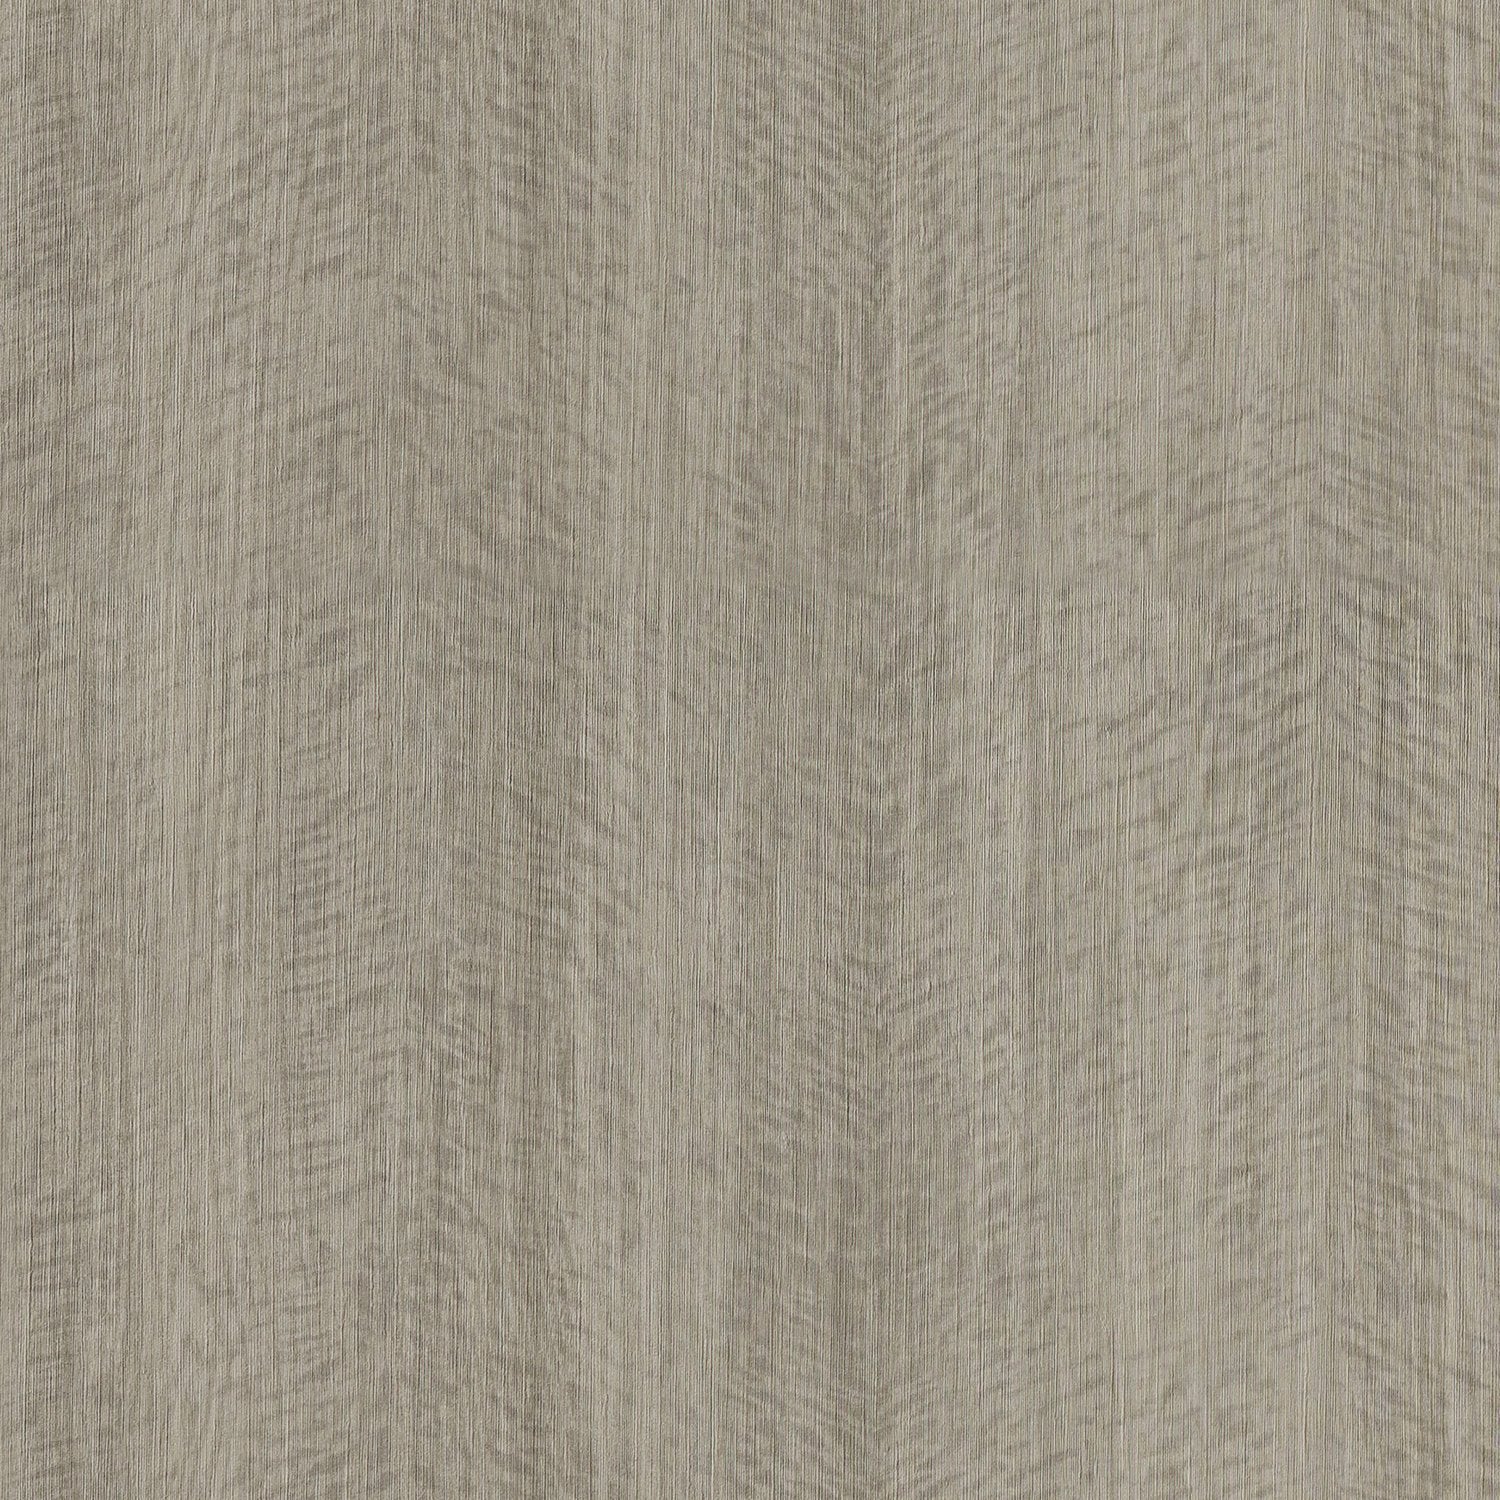 Woodn't It Be Nice - Y47875 - Wallcovering - Vycon - Kube Contract